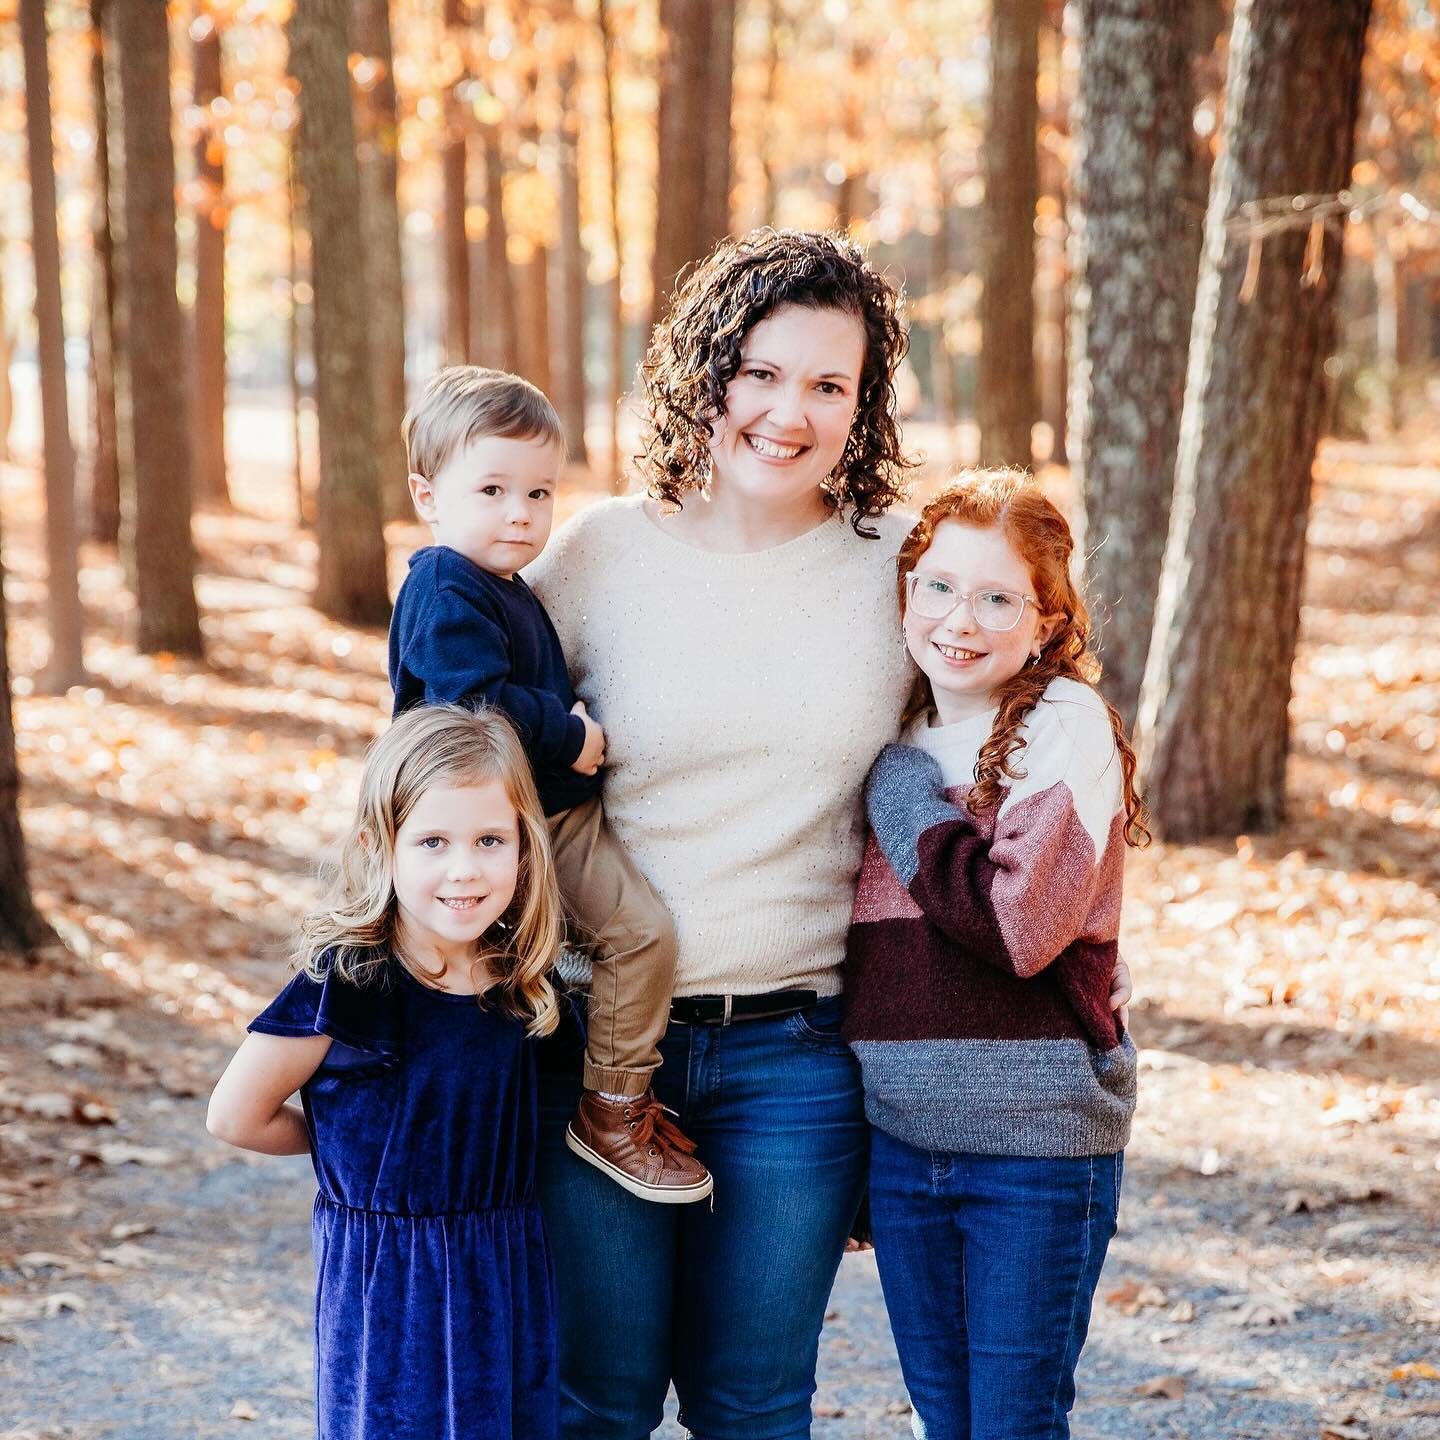 As I close out this year I&rsquo;m so grateful to have gotten to work with so many new families and reconnect with ones who I&rsquo;ve been shooting for years. So thankful for you all!
#cartersvillega #cartersvillefamilyphotographer #cartersvillephot